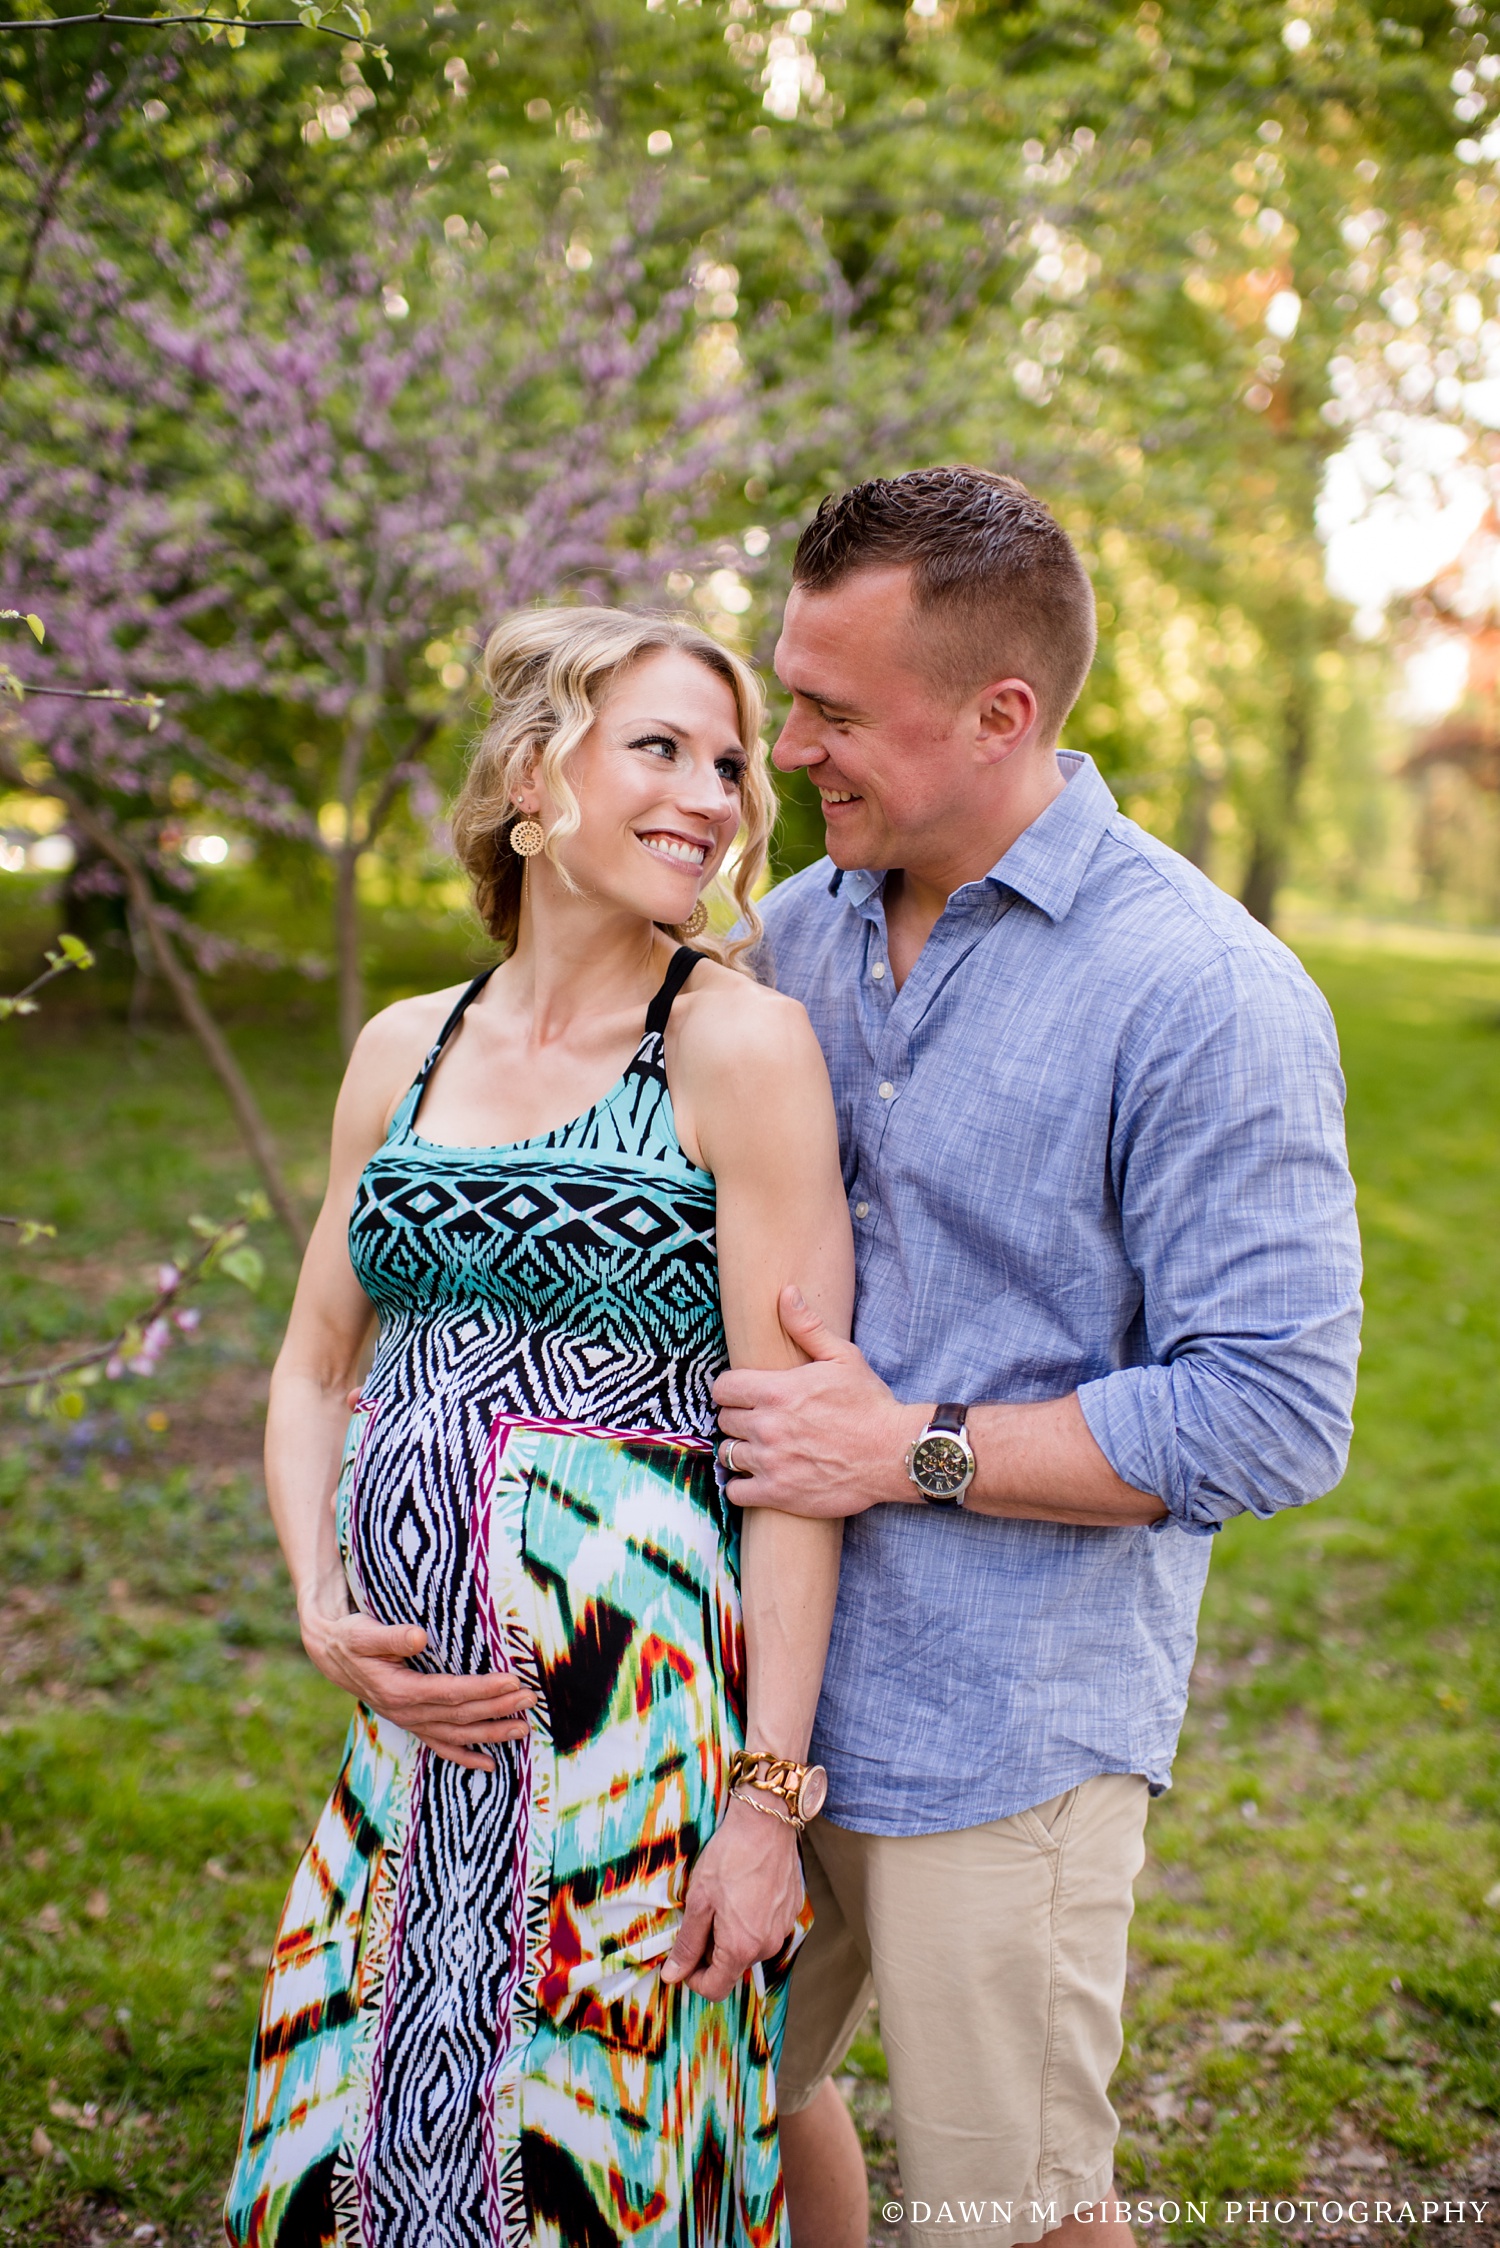 Brittany + Dustin Expecting | Photos by Dawn M Gibson Photography